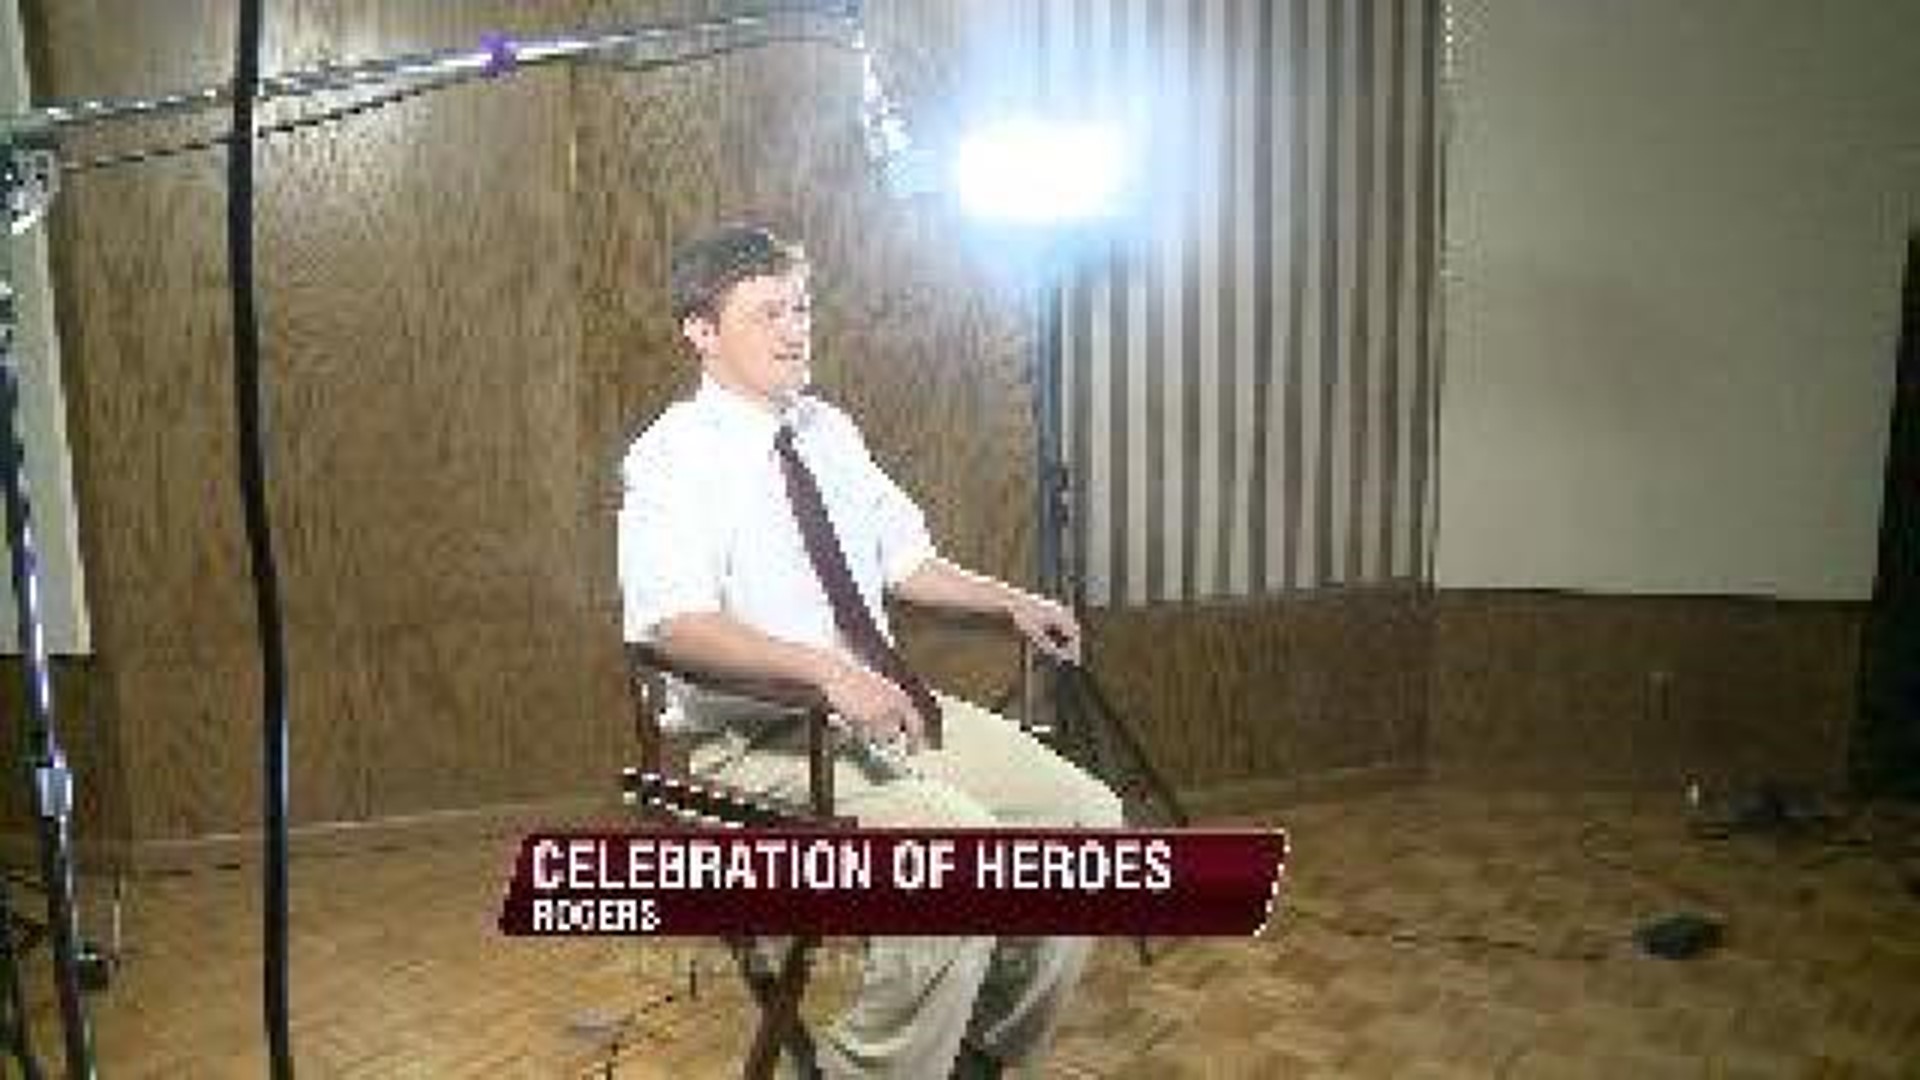 Red Cross Preps for Celebration of Heroes